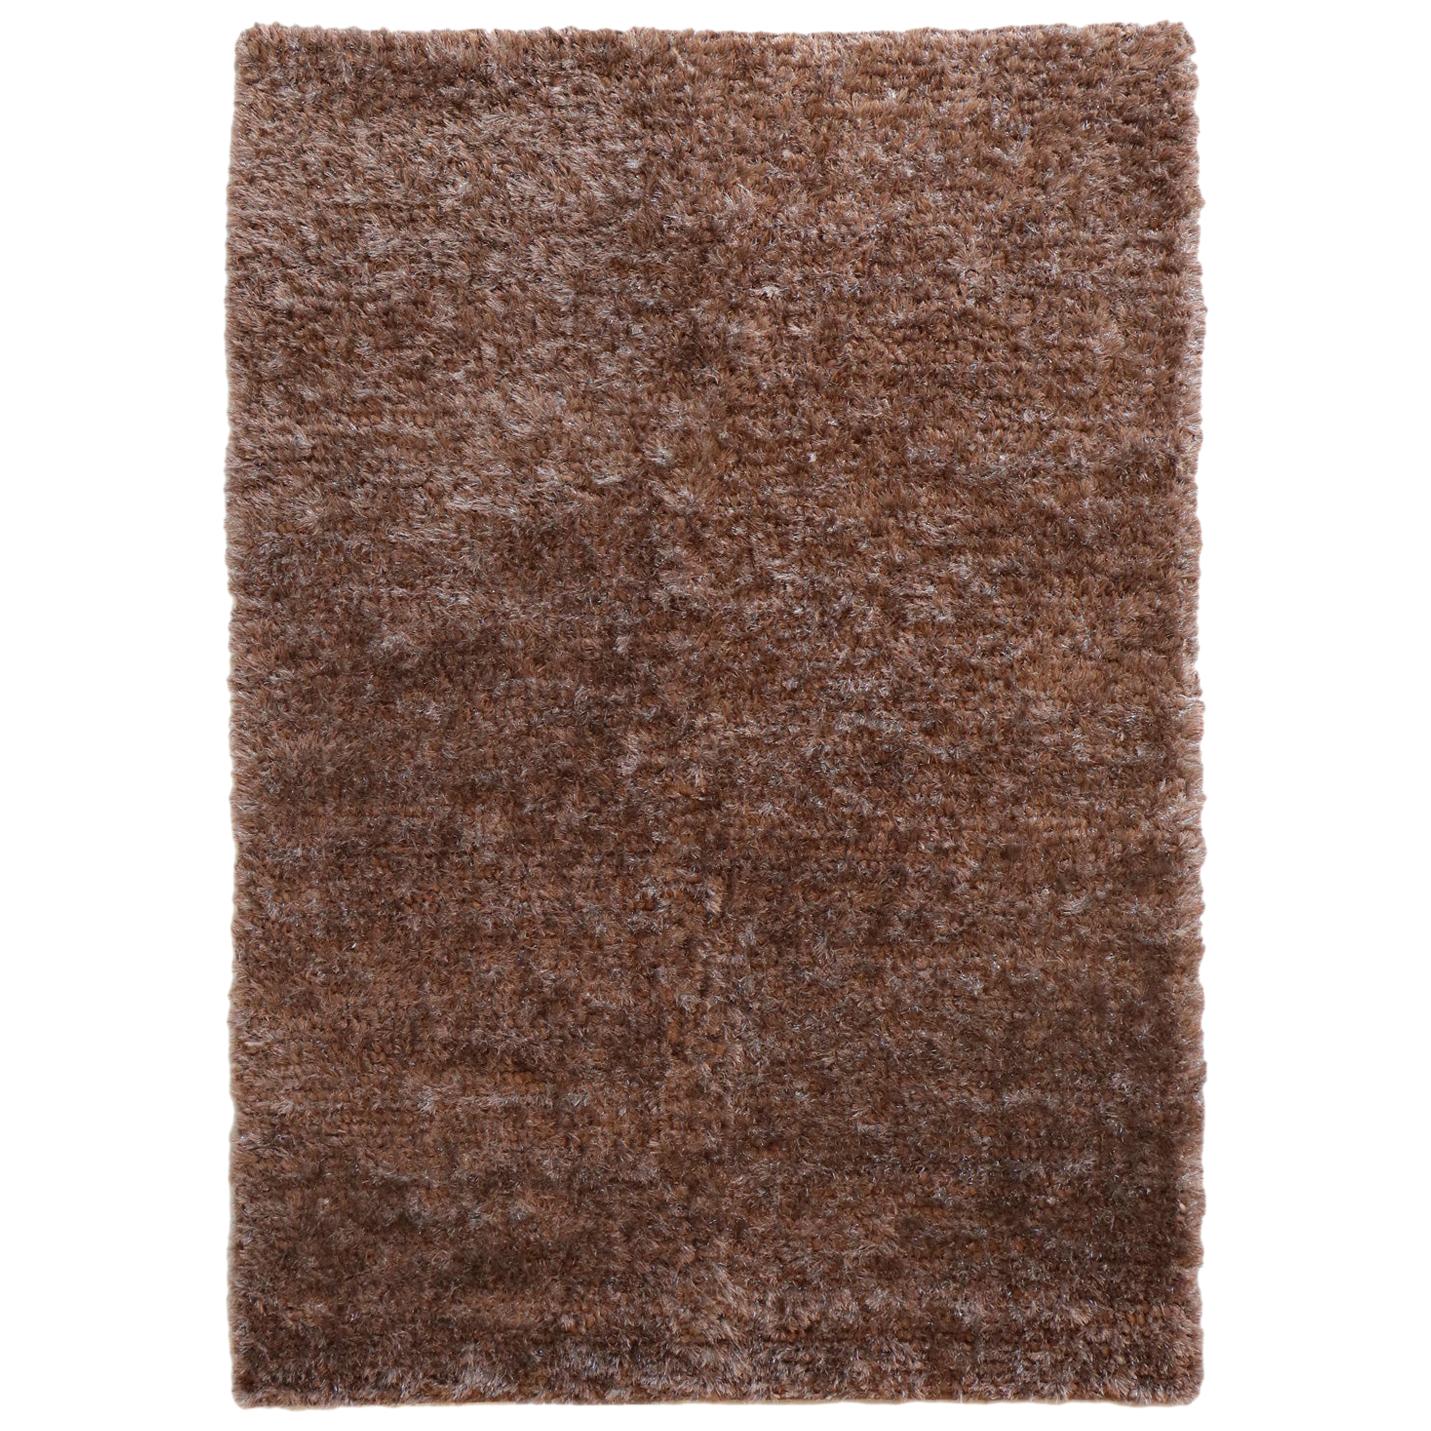 Nature Inspired Luminous Spring Brown Rug by Deanna Comellini In Stock 170x240cm For Sale